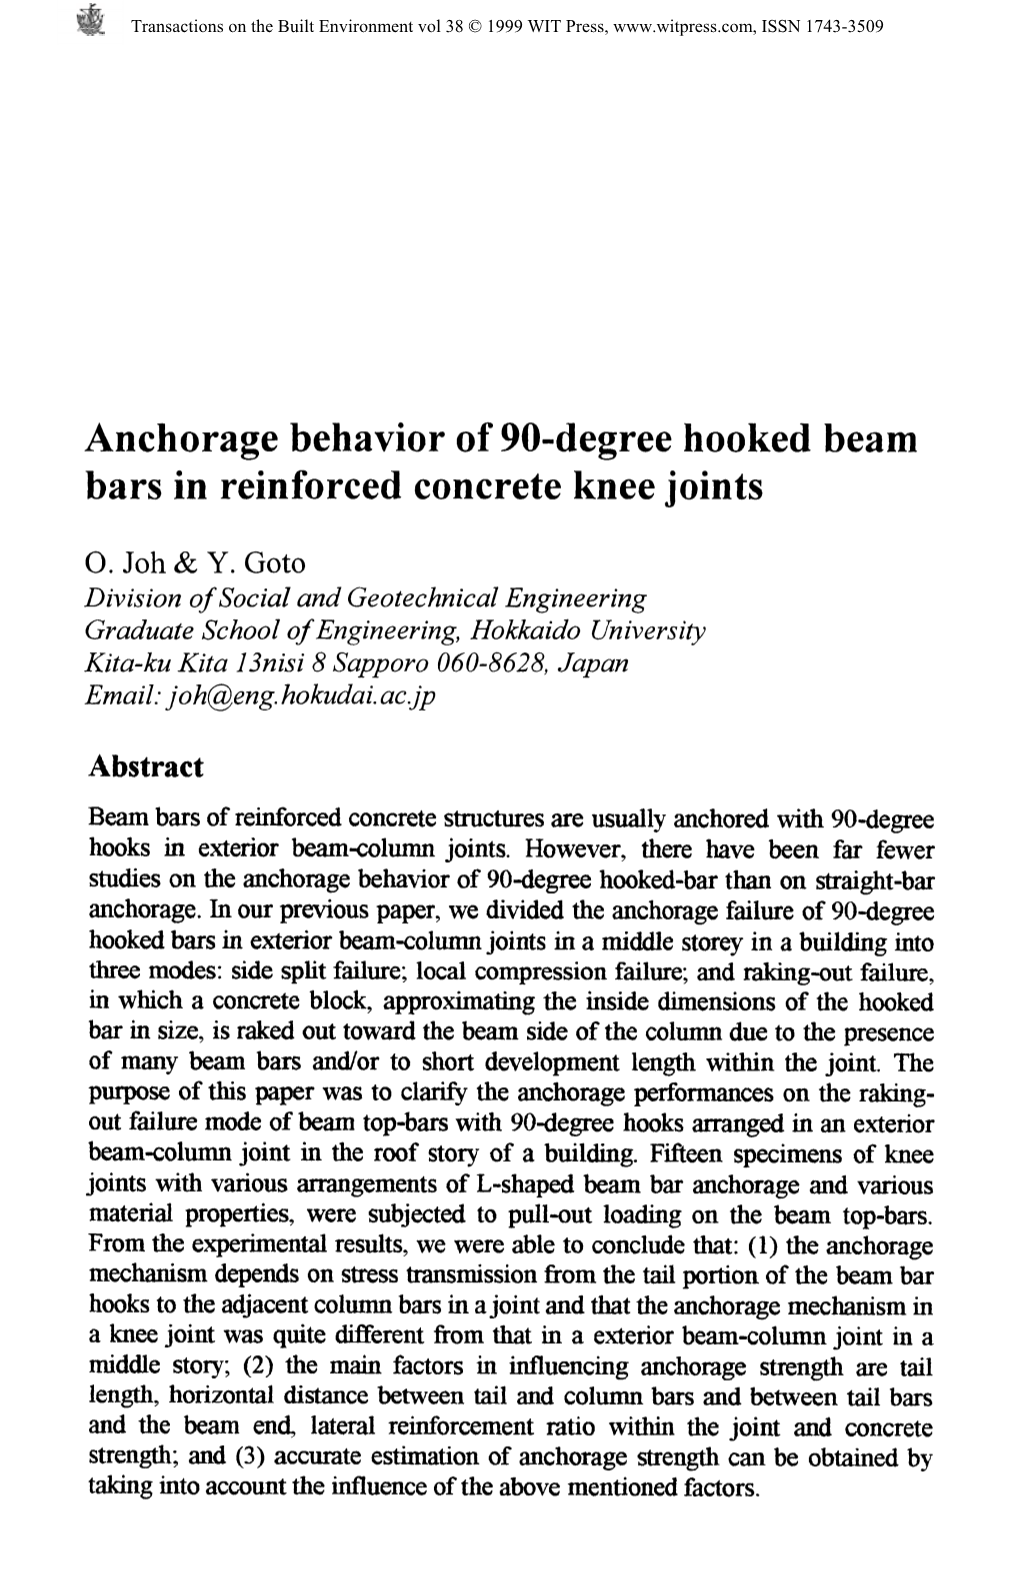 Anchorage Behavior of 90-Degree Hooked Beam Bars in Reinforced Concrete Knee Joints